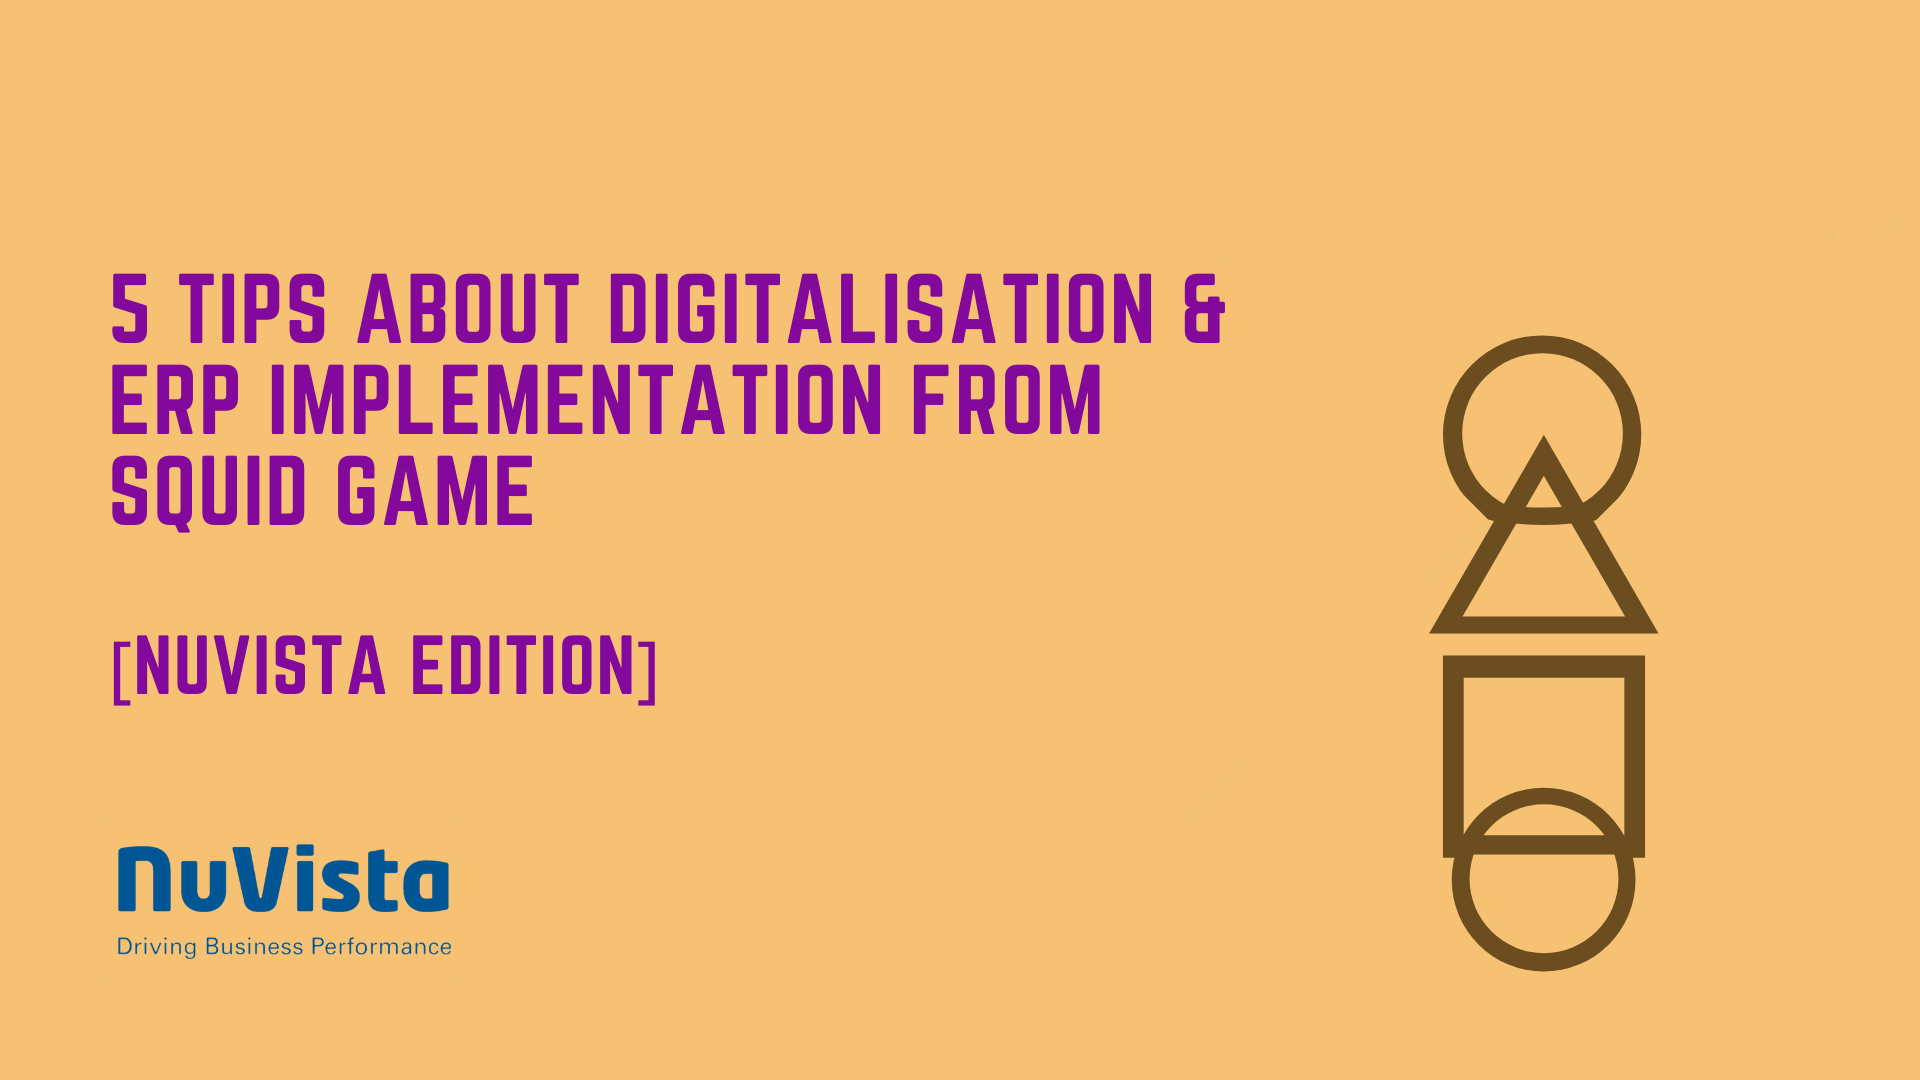 5 Tips about Digitalization & ERP Implementation from Squid Game